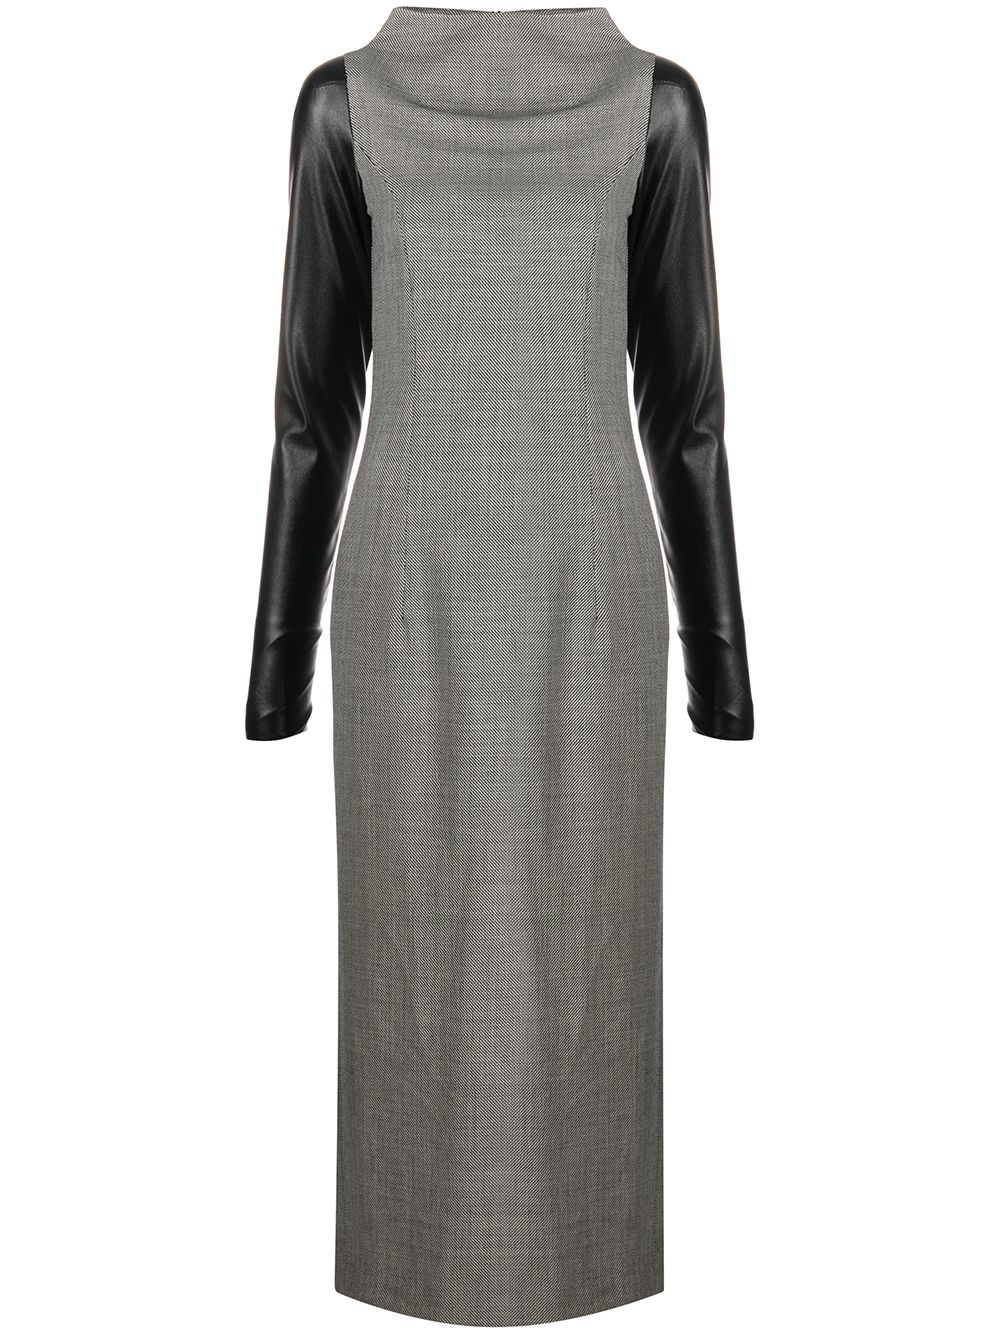 Gianfranco Ferré Pre-Owned 2000s contrast-sleeve dress - Grey von Gianfranco Ferré Pre-Owned